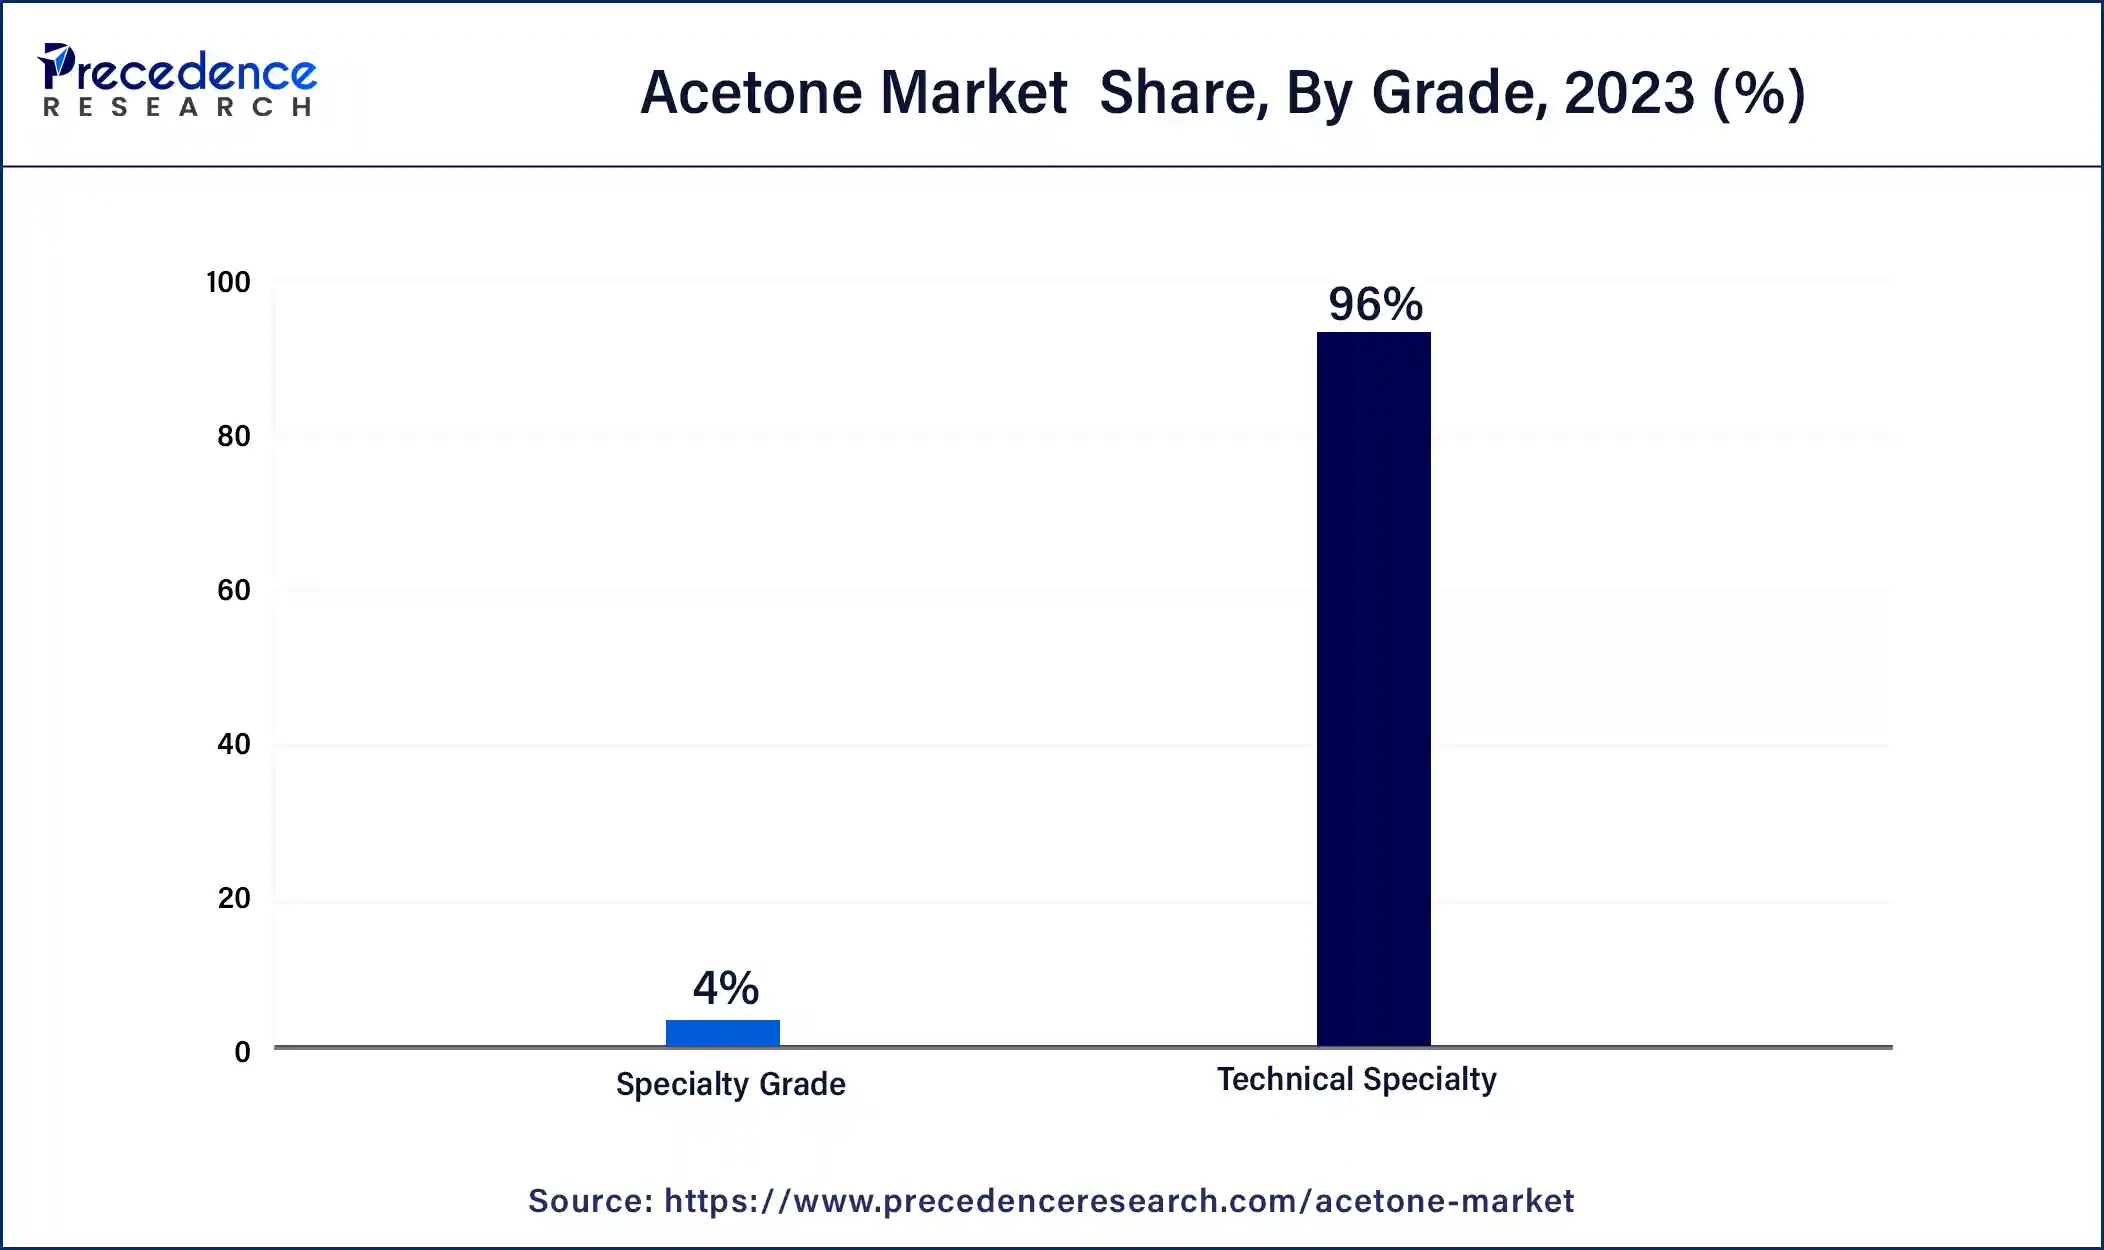 Acetone Market Share, By Grade, 2023 (%)